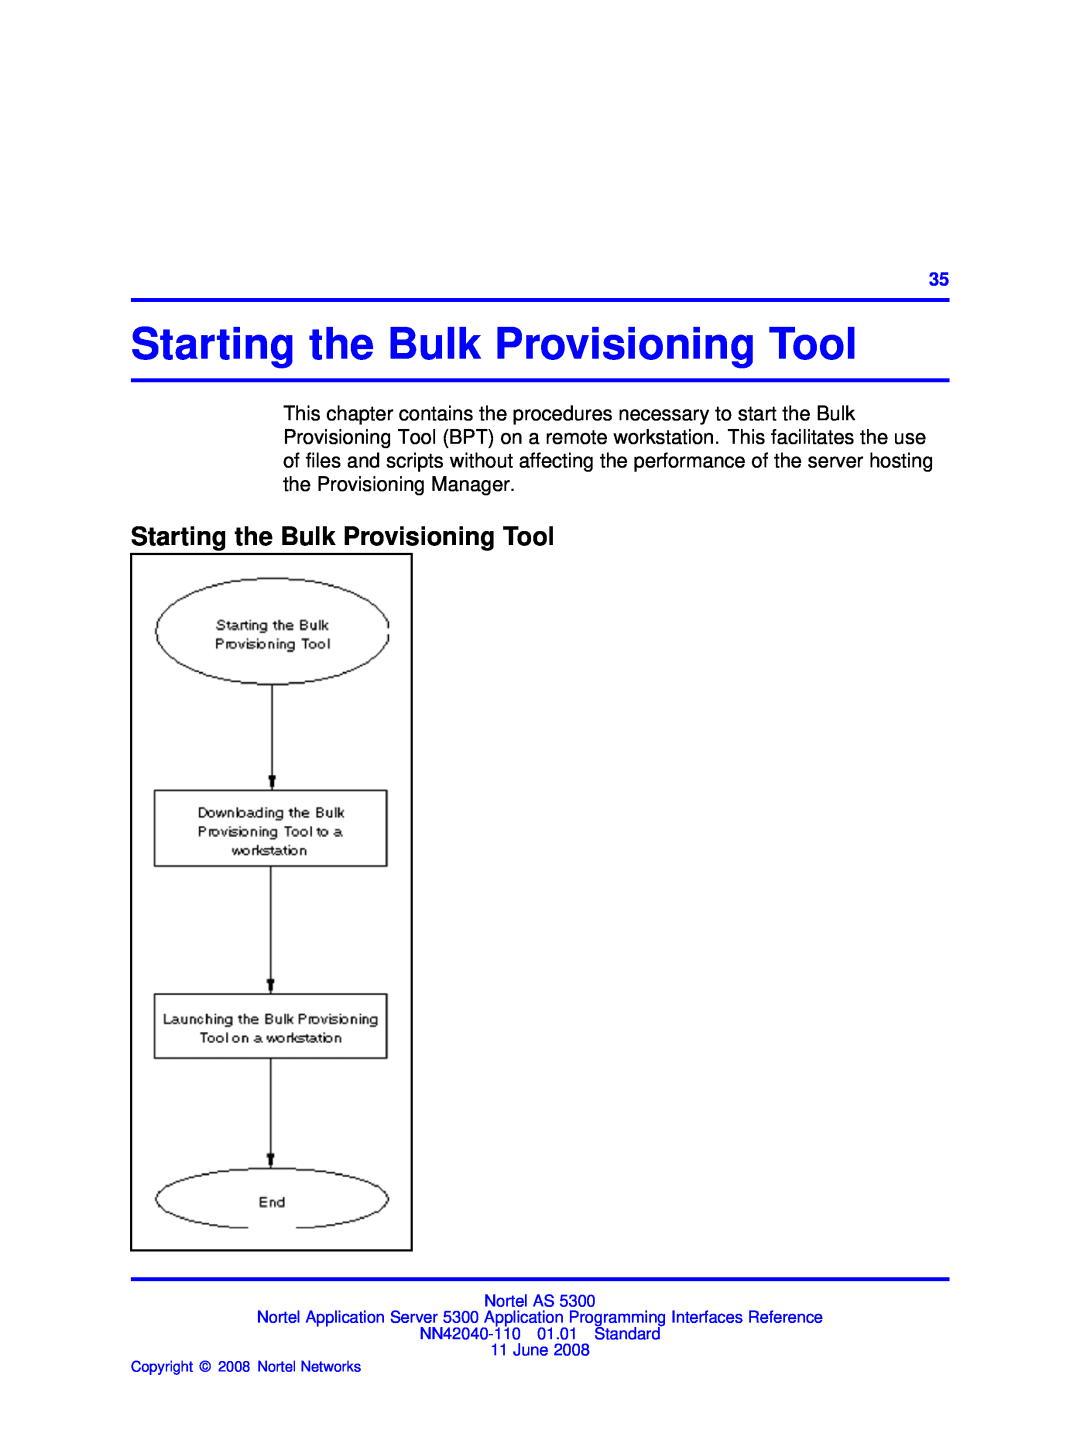 Nortel Networks AS 5300 manual Starting the Bulk Provisioning Tool 